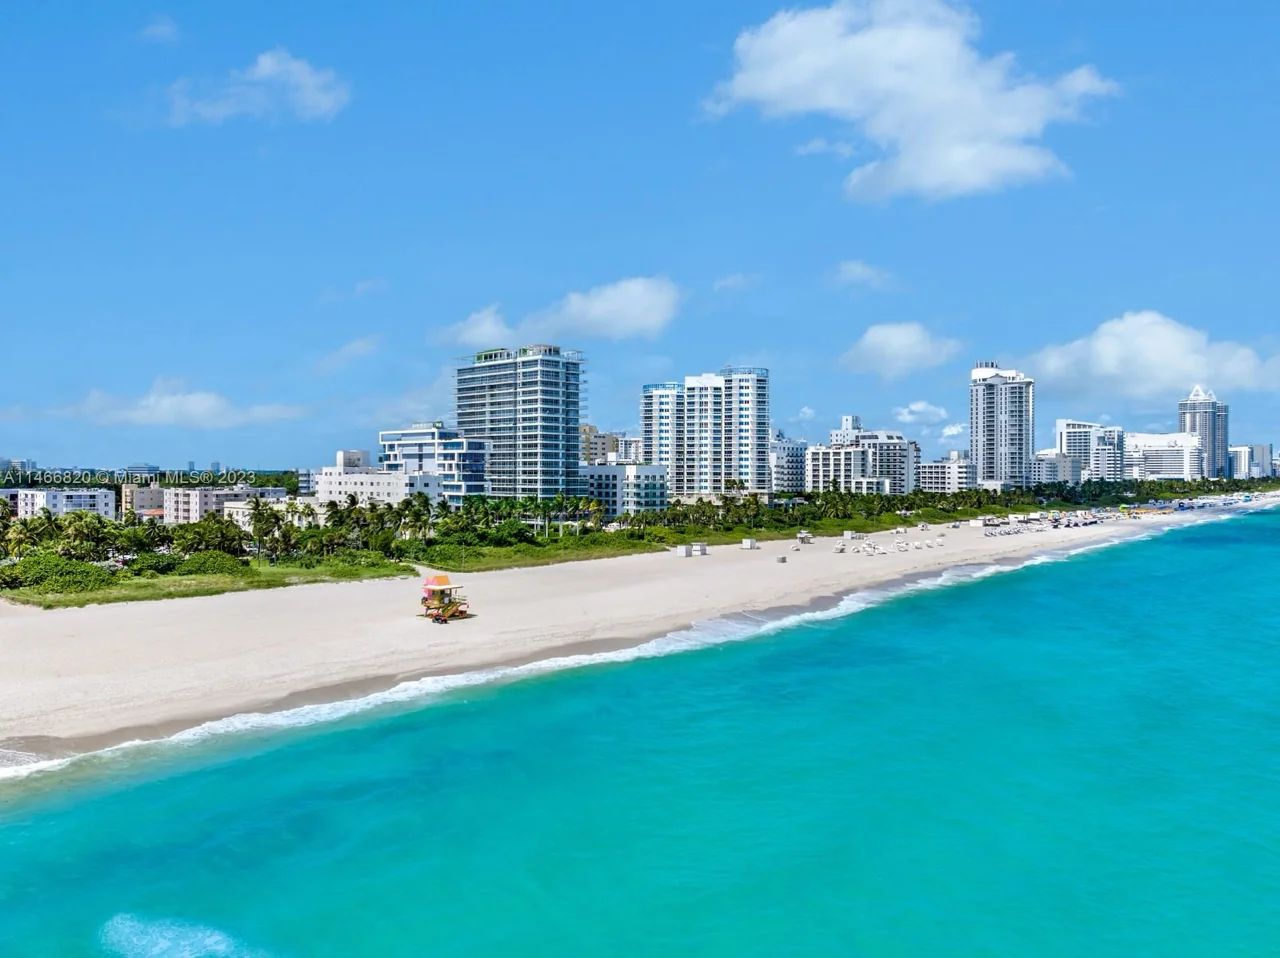 Panoramic View of Beach House 8 Showcasing Its Prime Oceanfront Location in Miami Beach